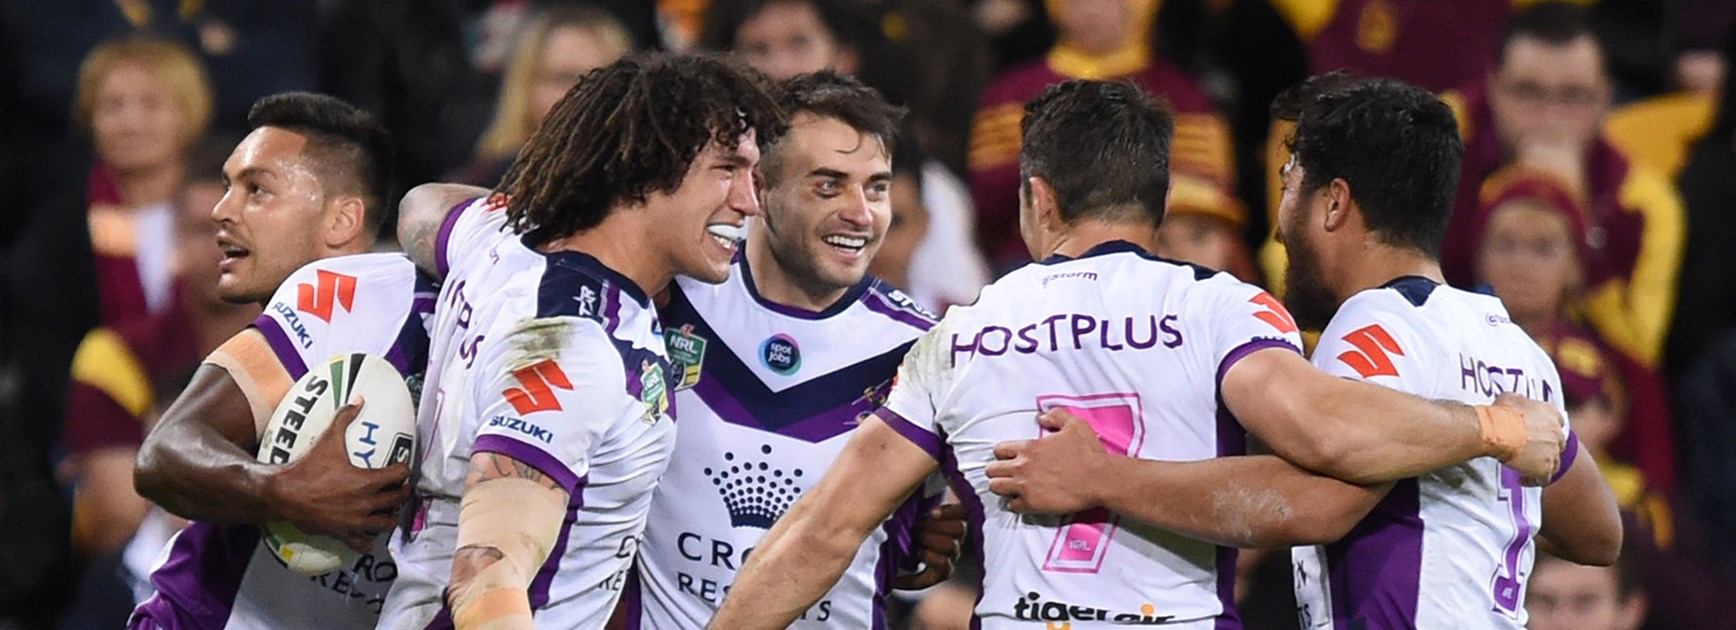 Melbourne Storm celebrate another try against the Broncos at Suncorp Stadium.